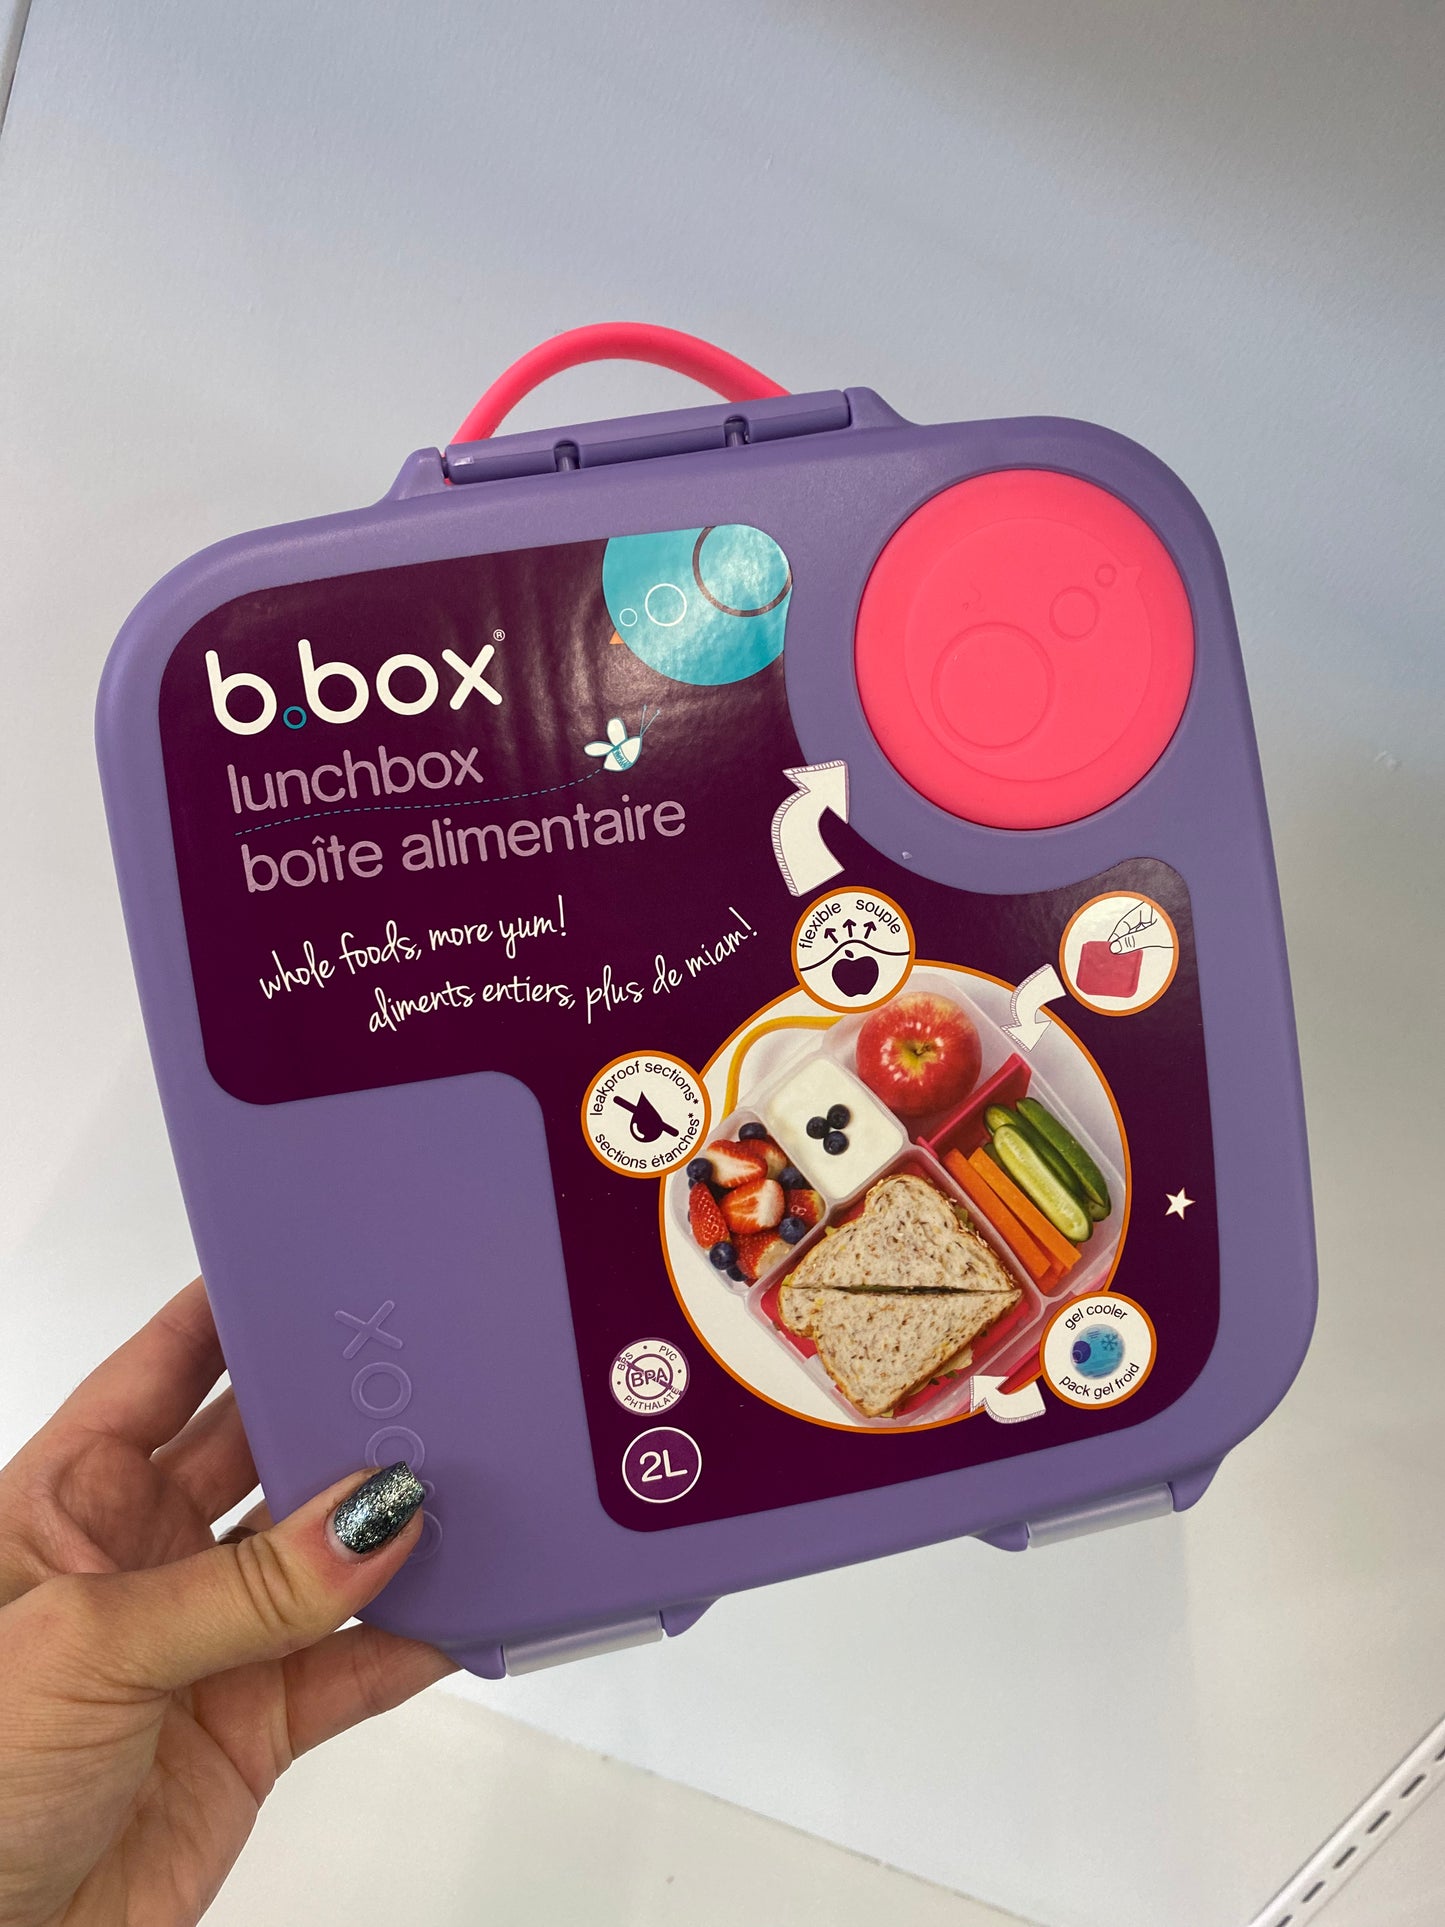 b.box lunchboxes